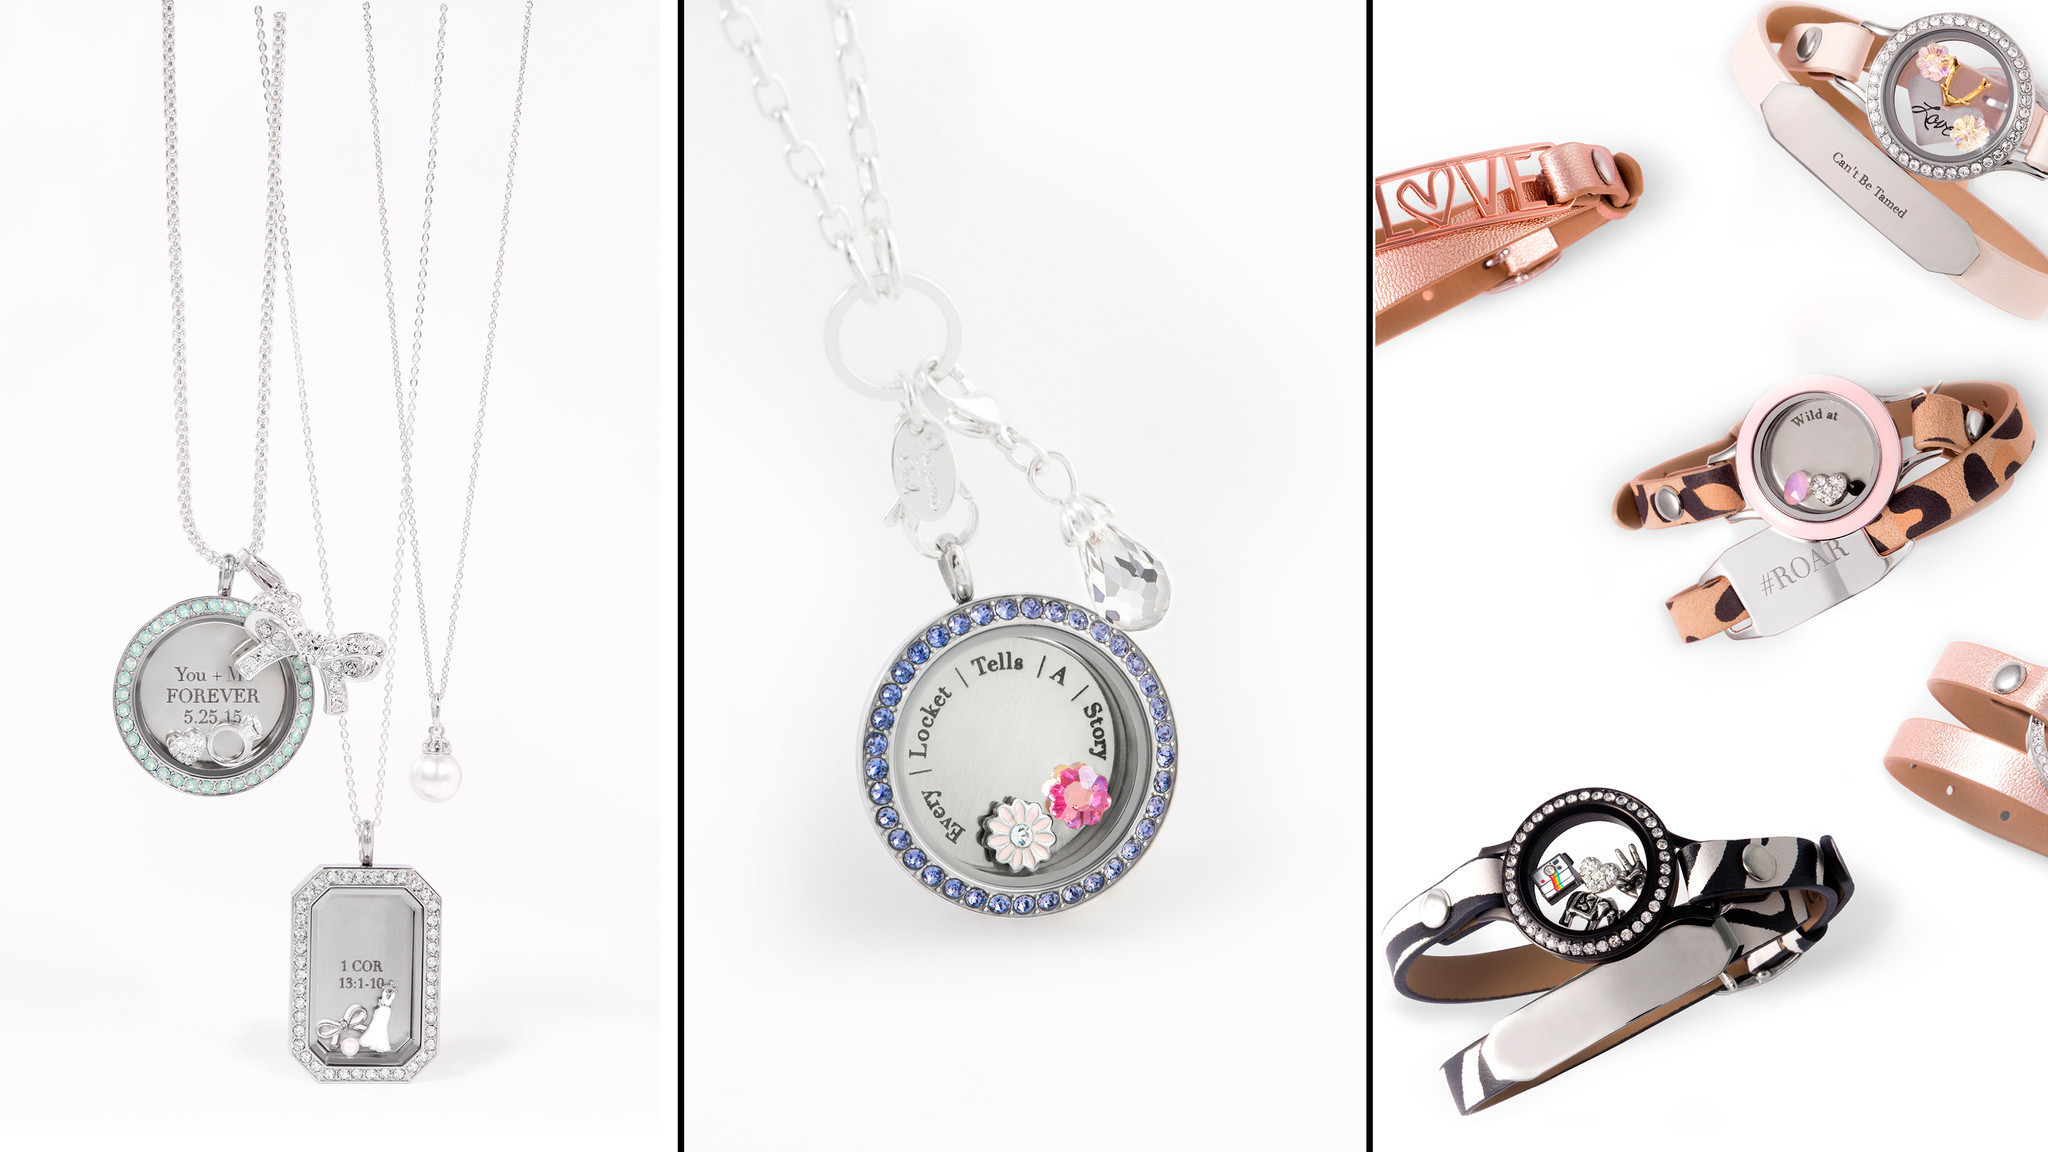 Origami Owl brings a teenager's vision and success to Chicago Chicago